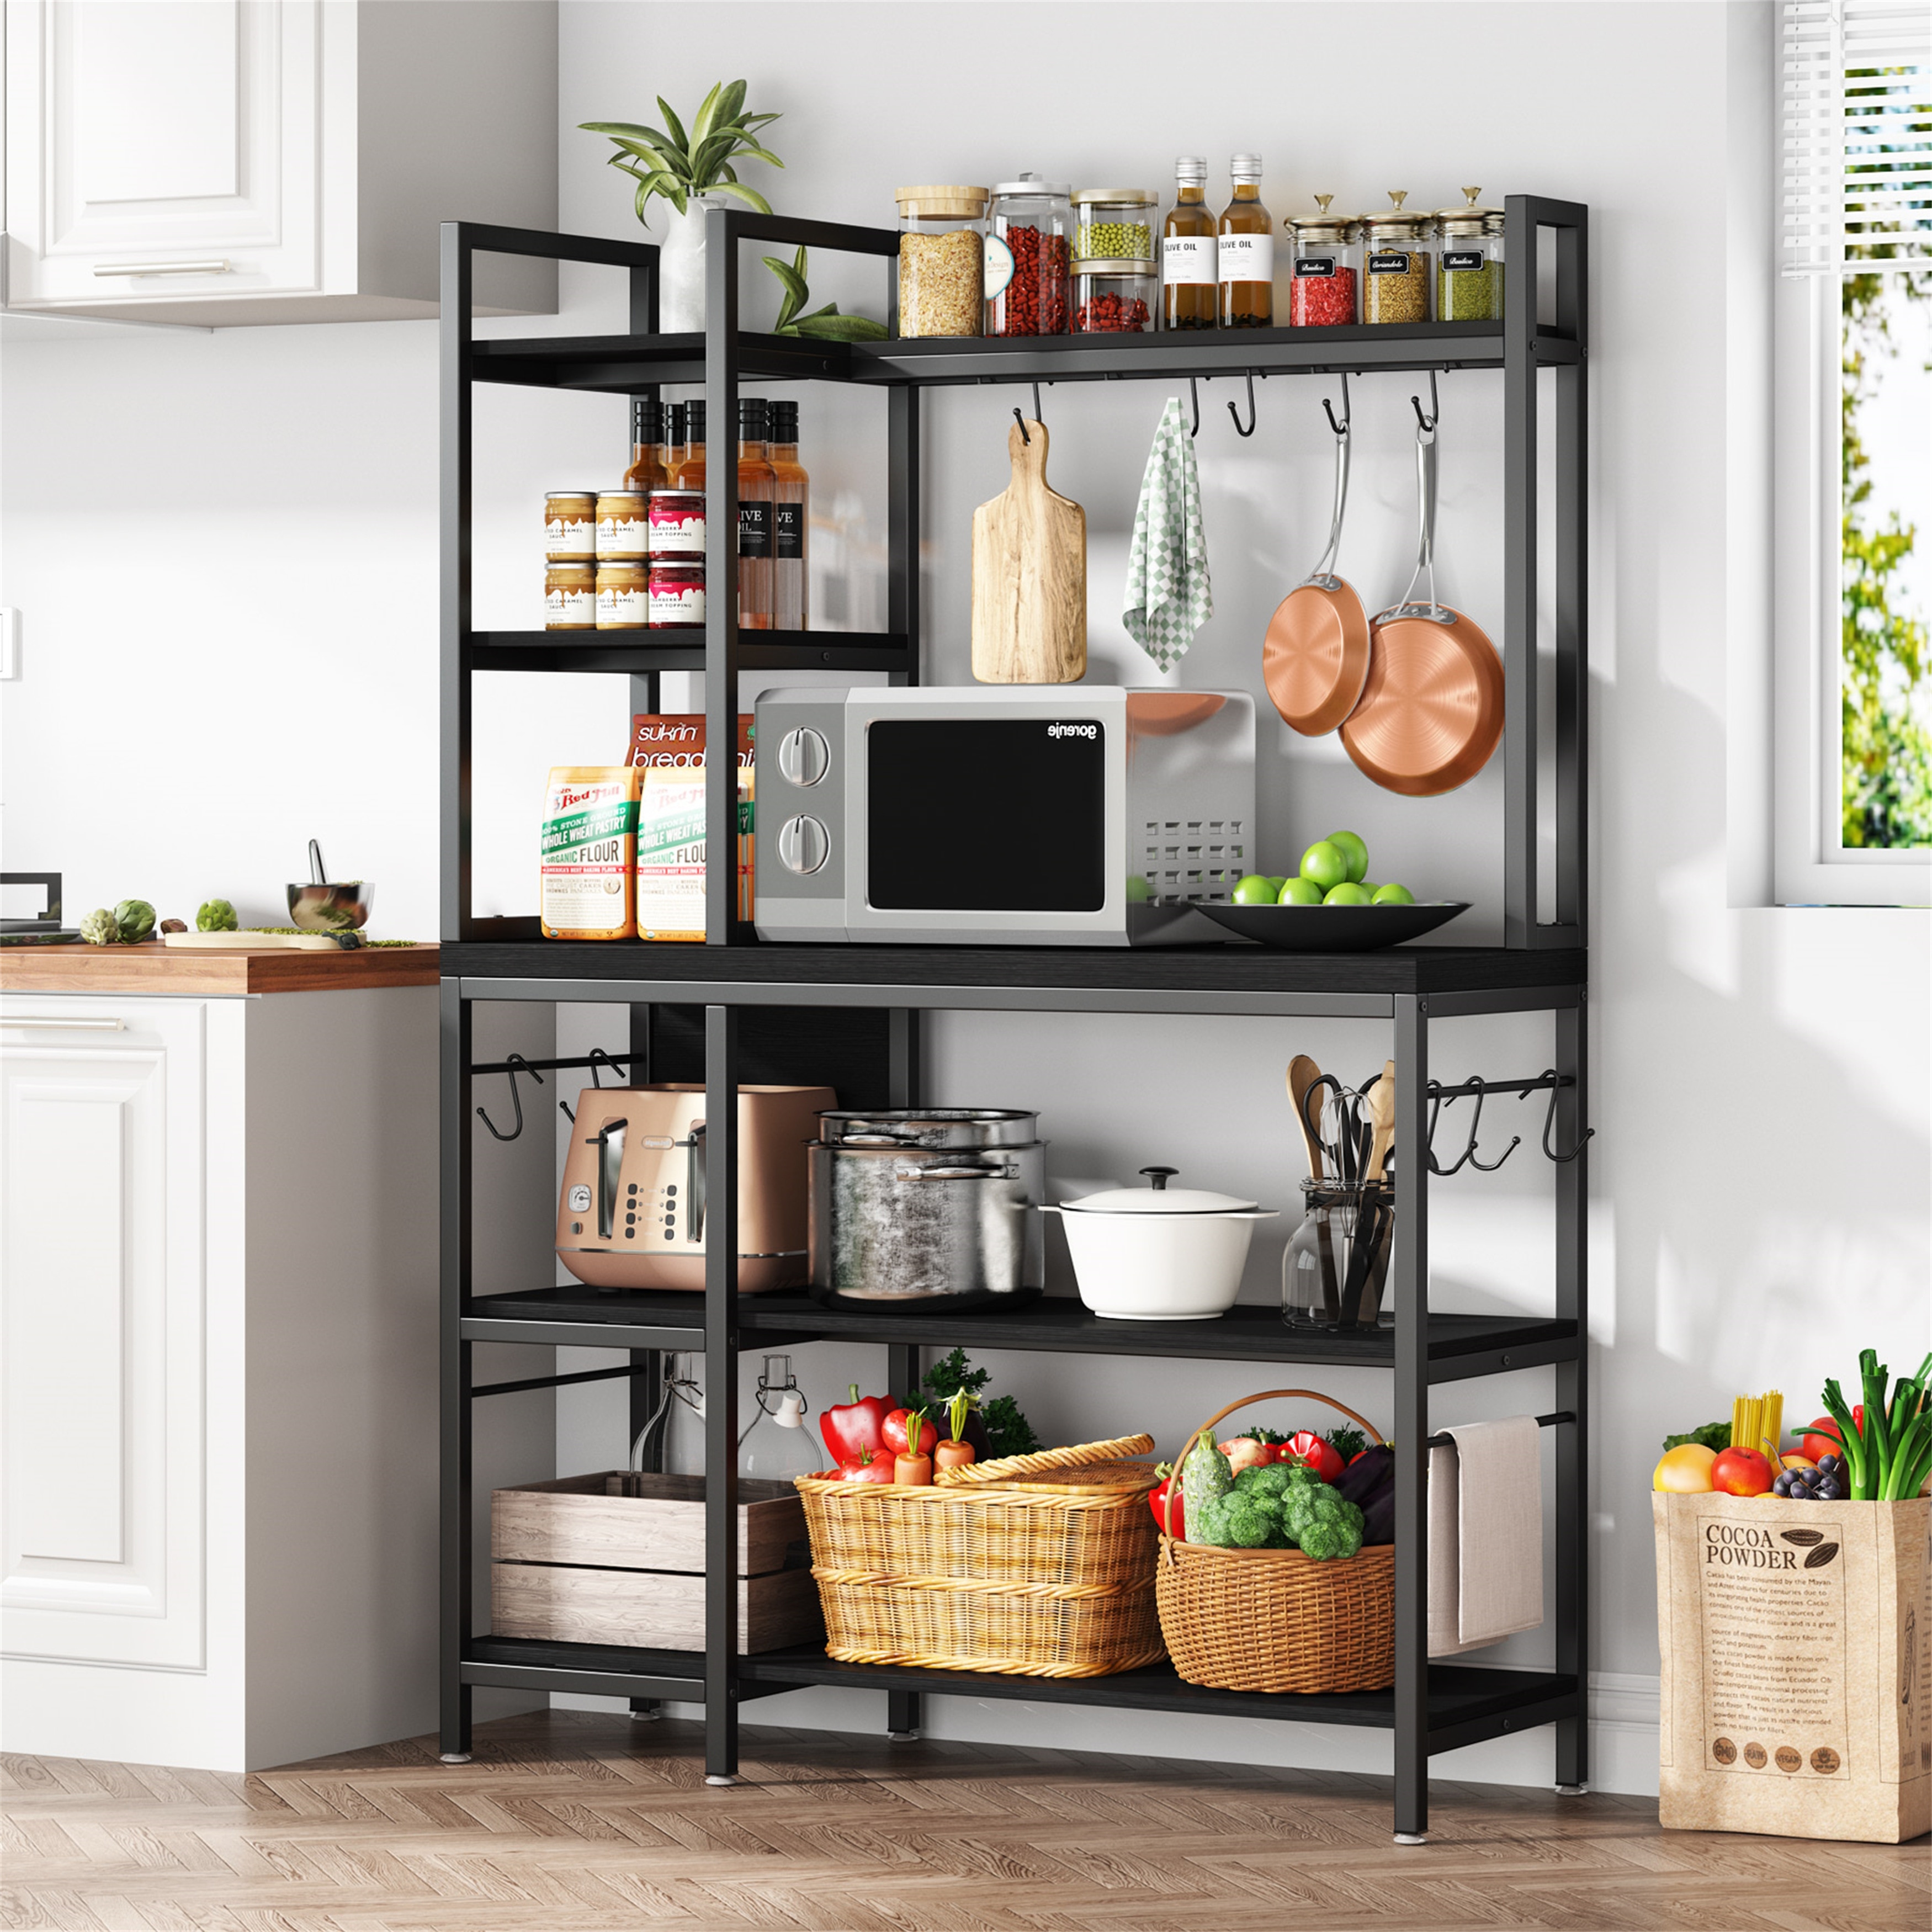 https://ak1.ostkcdn.com/images/products/is/images/direct/f5a17933897a45cb21231dee15eb20fb55749946/Bakers-Rack%2C-Kitchen-Organizer-Shelves%2C-Microwave-Oven-Stand%2C-5-Tier-Kitchen-Utility-Storage-Shelf.jpg